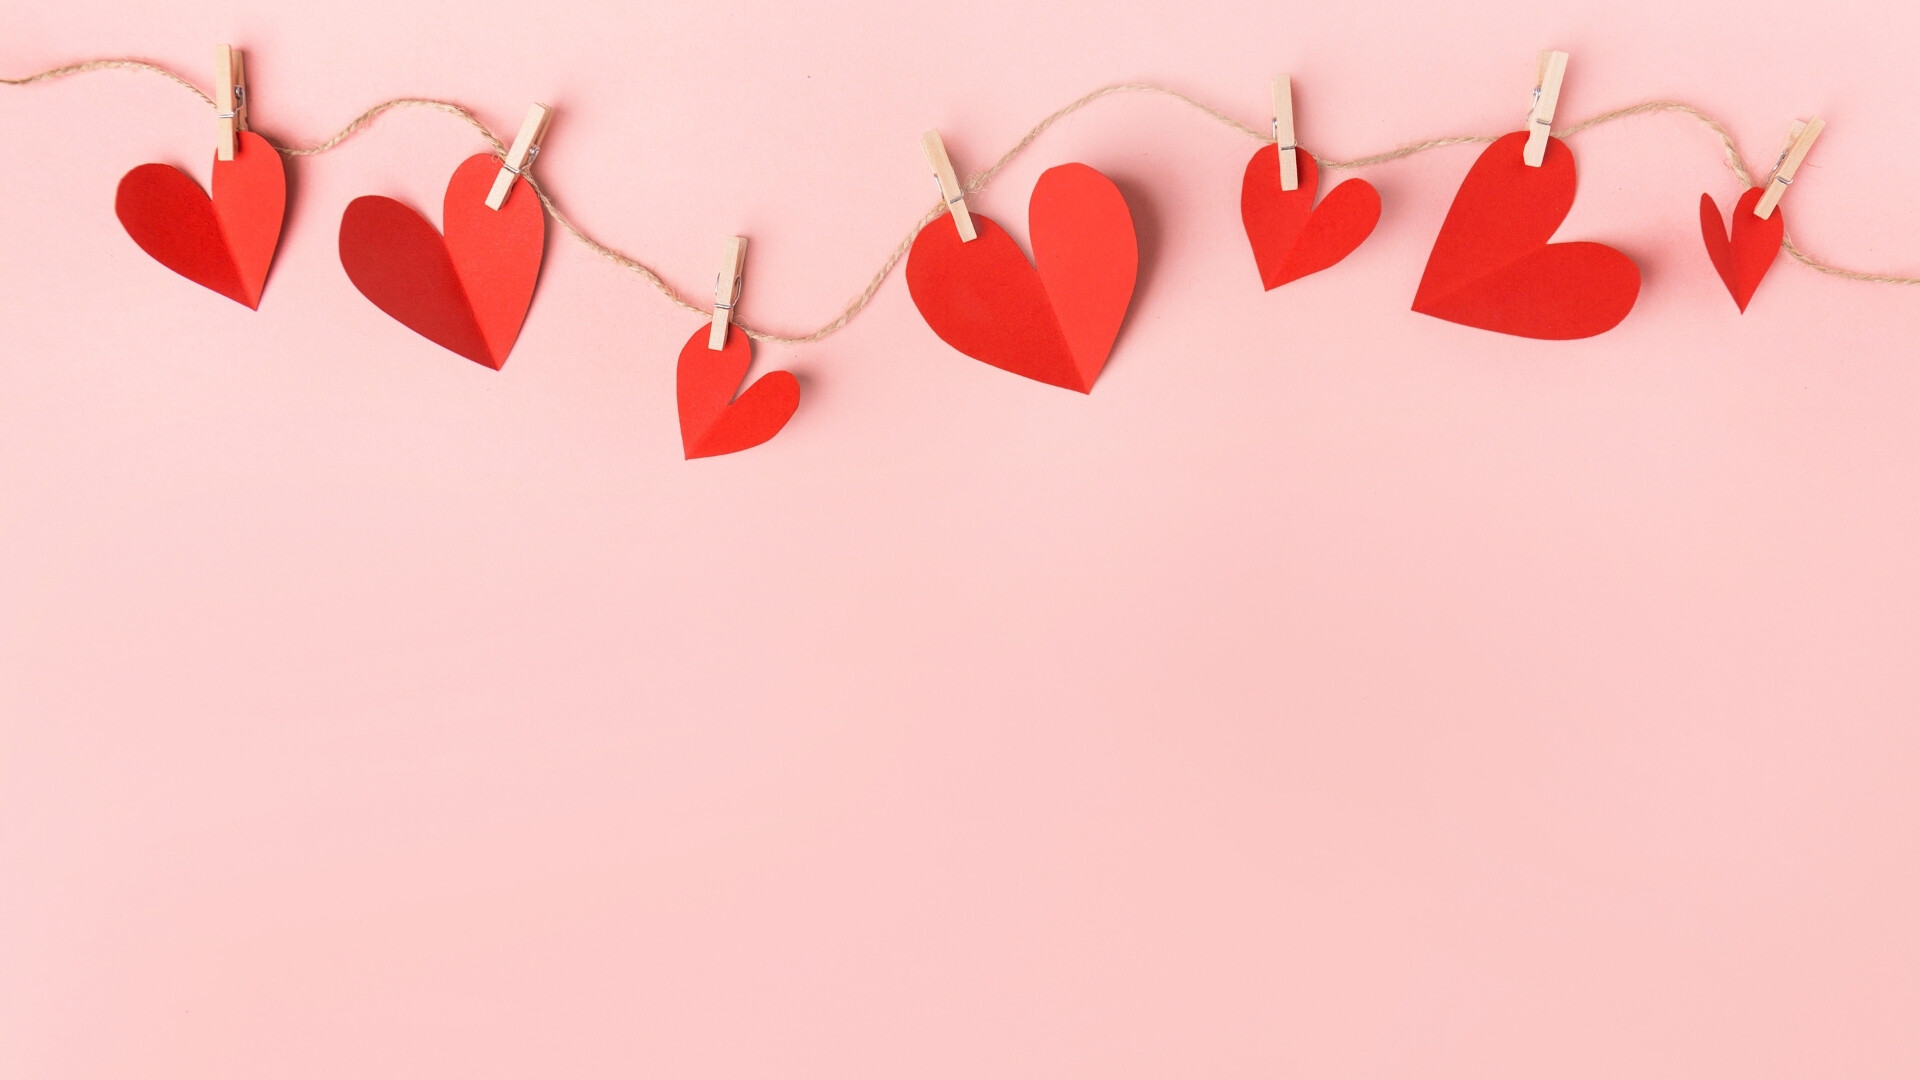 Happy Valentine's Day, Expressive images, Free HD wallpapers, 24wallpapers collection, 1920x1080 Full HD Desktop